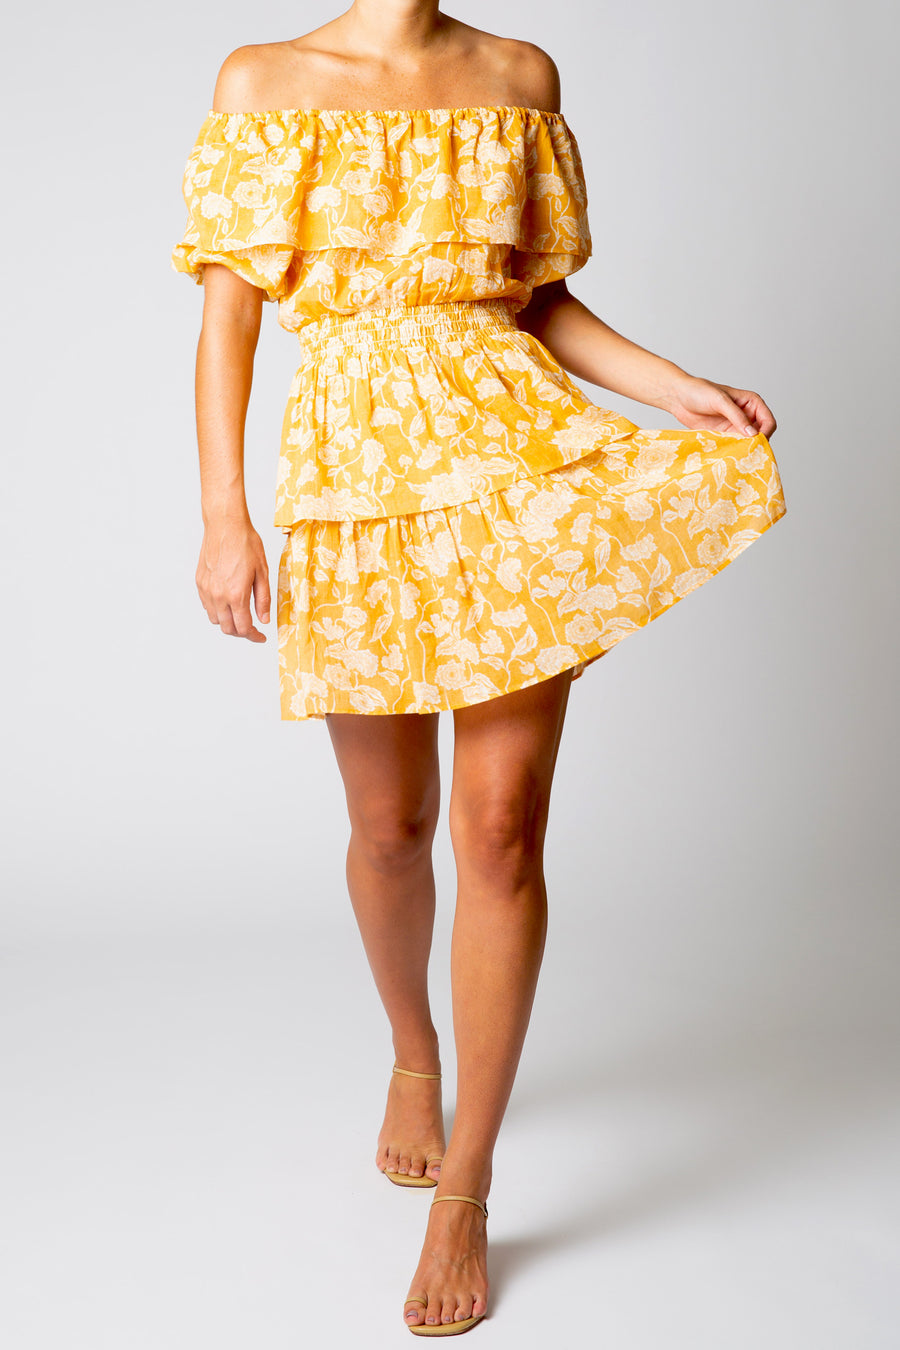 This is a photo of a woman wearing a short and flowy yellow dress with a pattern.